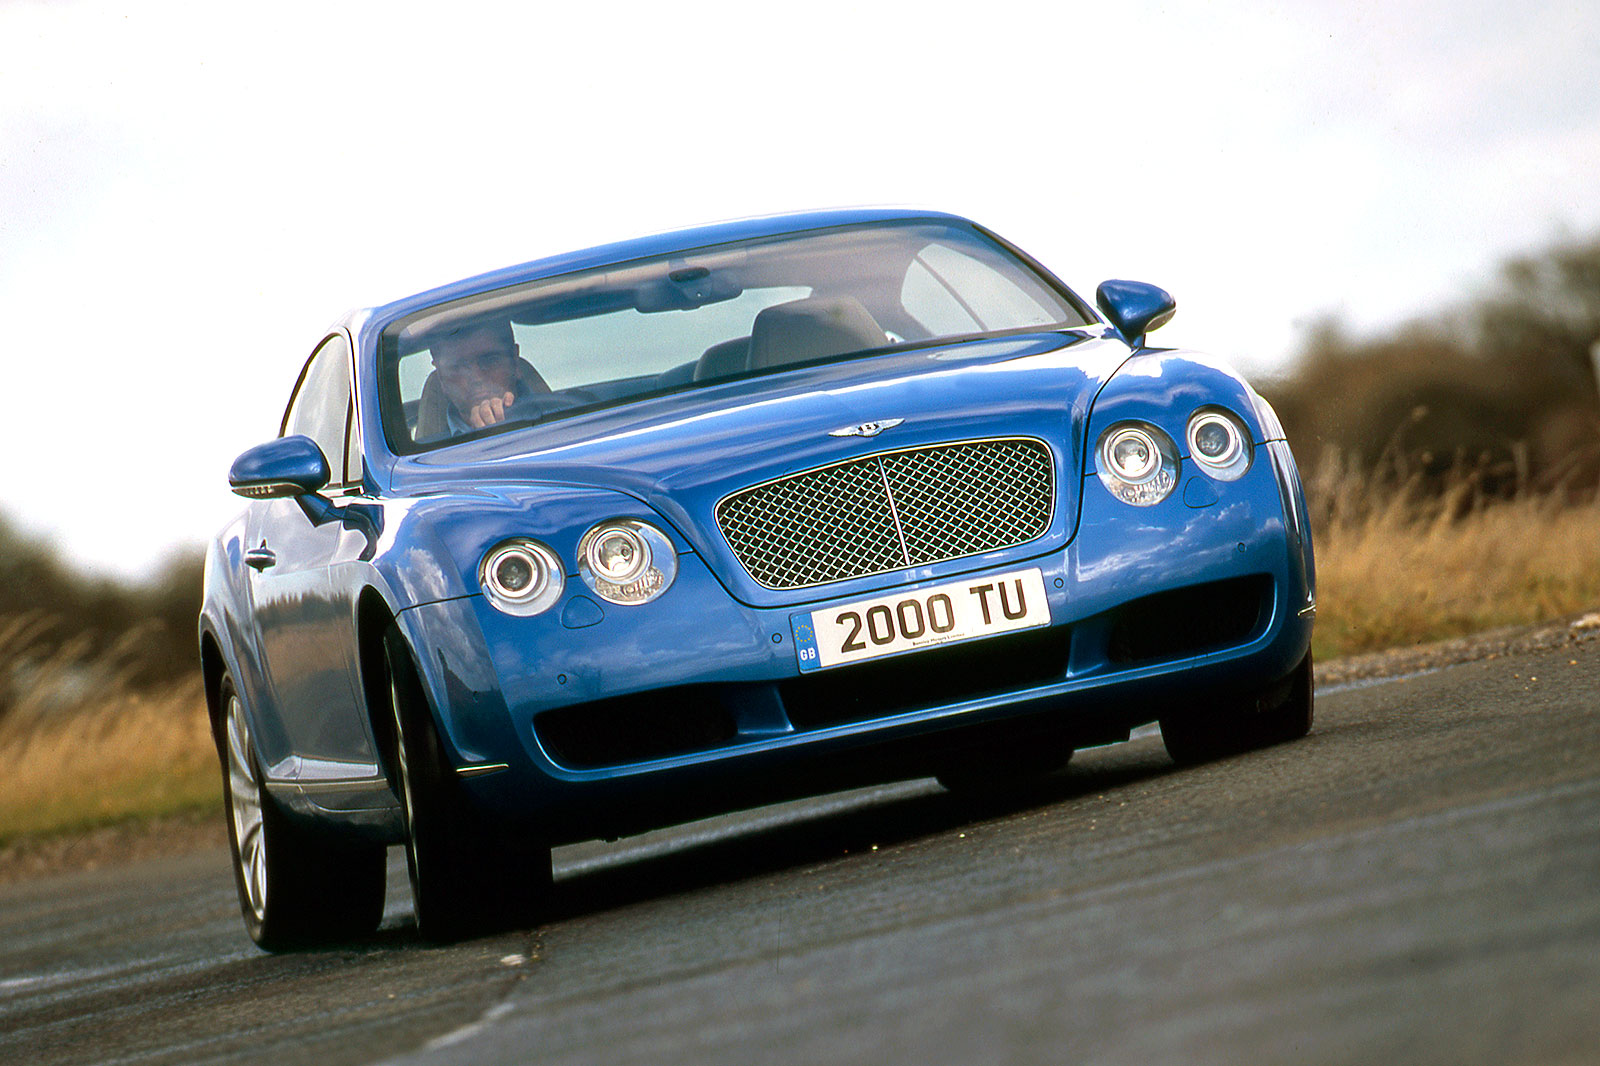 <p>Bentley only made around 800 cars in the year before the Continental GT was launched, so even it was caught off guard by the <strong>runaway success</strong> of the sleek coupe. A <strong>convertible</strong> joined the range in 2006 to further expand sales and Bentley has never looked back since. Even the addition of the Bentayga SUV to the Bentley lineup in 2015 has yet to threaten the total sales supremacy of the Continental.</p>